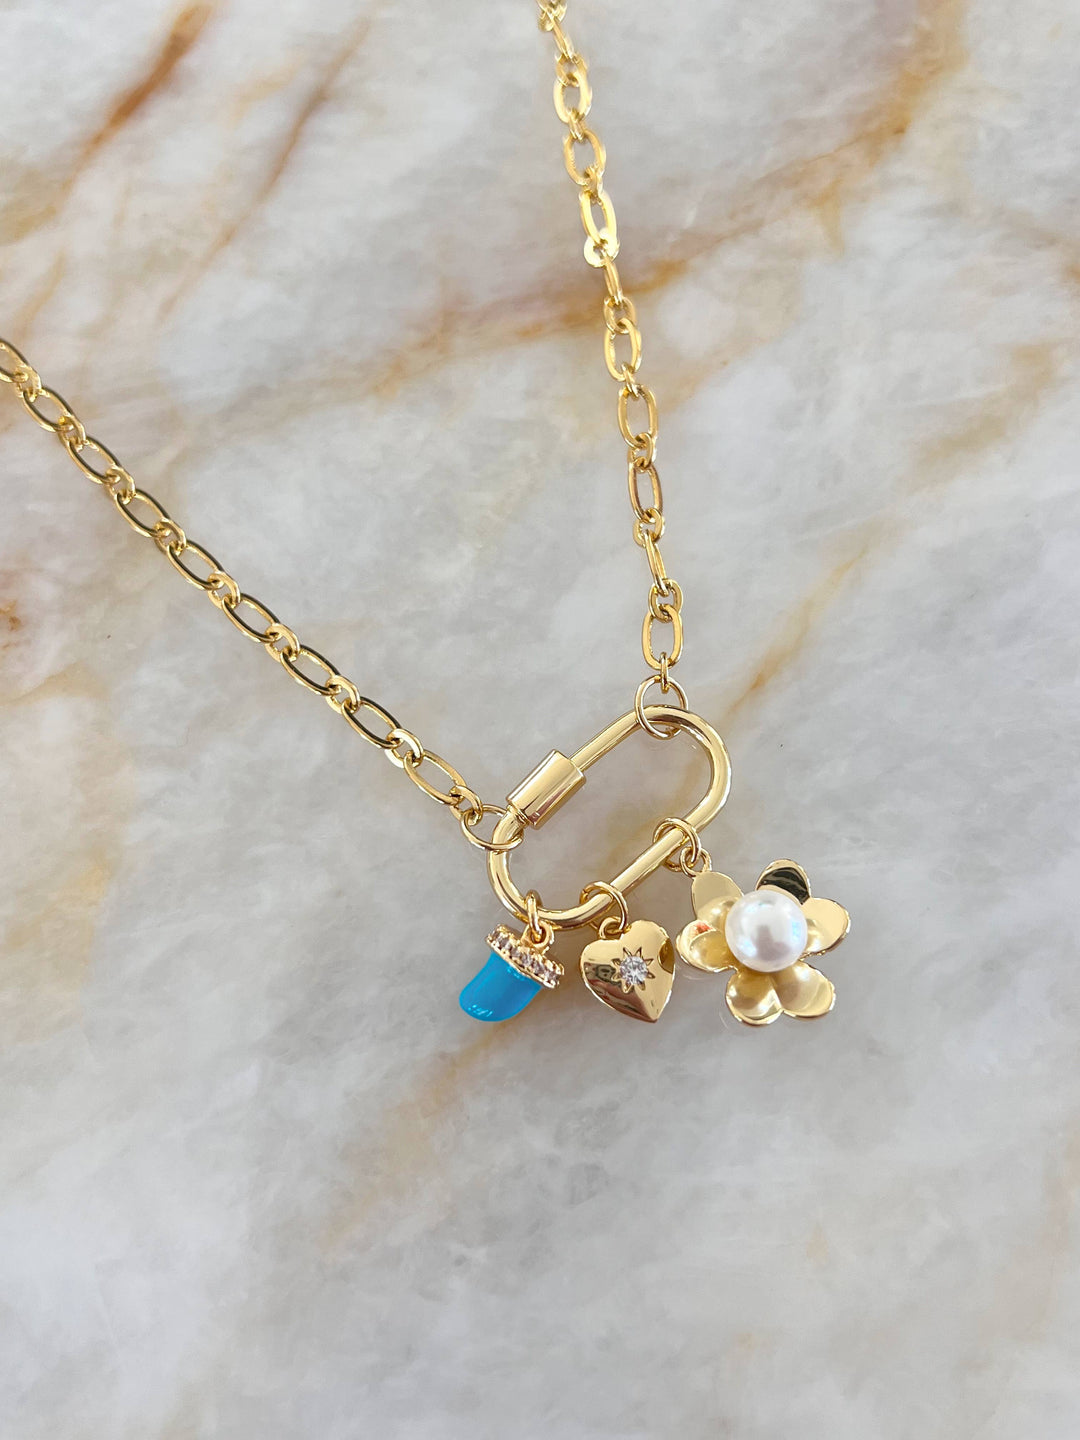 It's Especially Lucky - Chain Options for Charm Bar: Dainty link bracelet - Sienna Sky Boutique